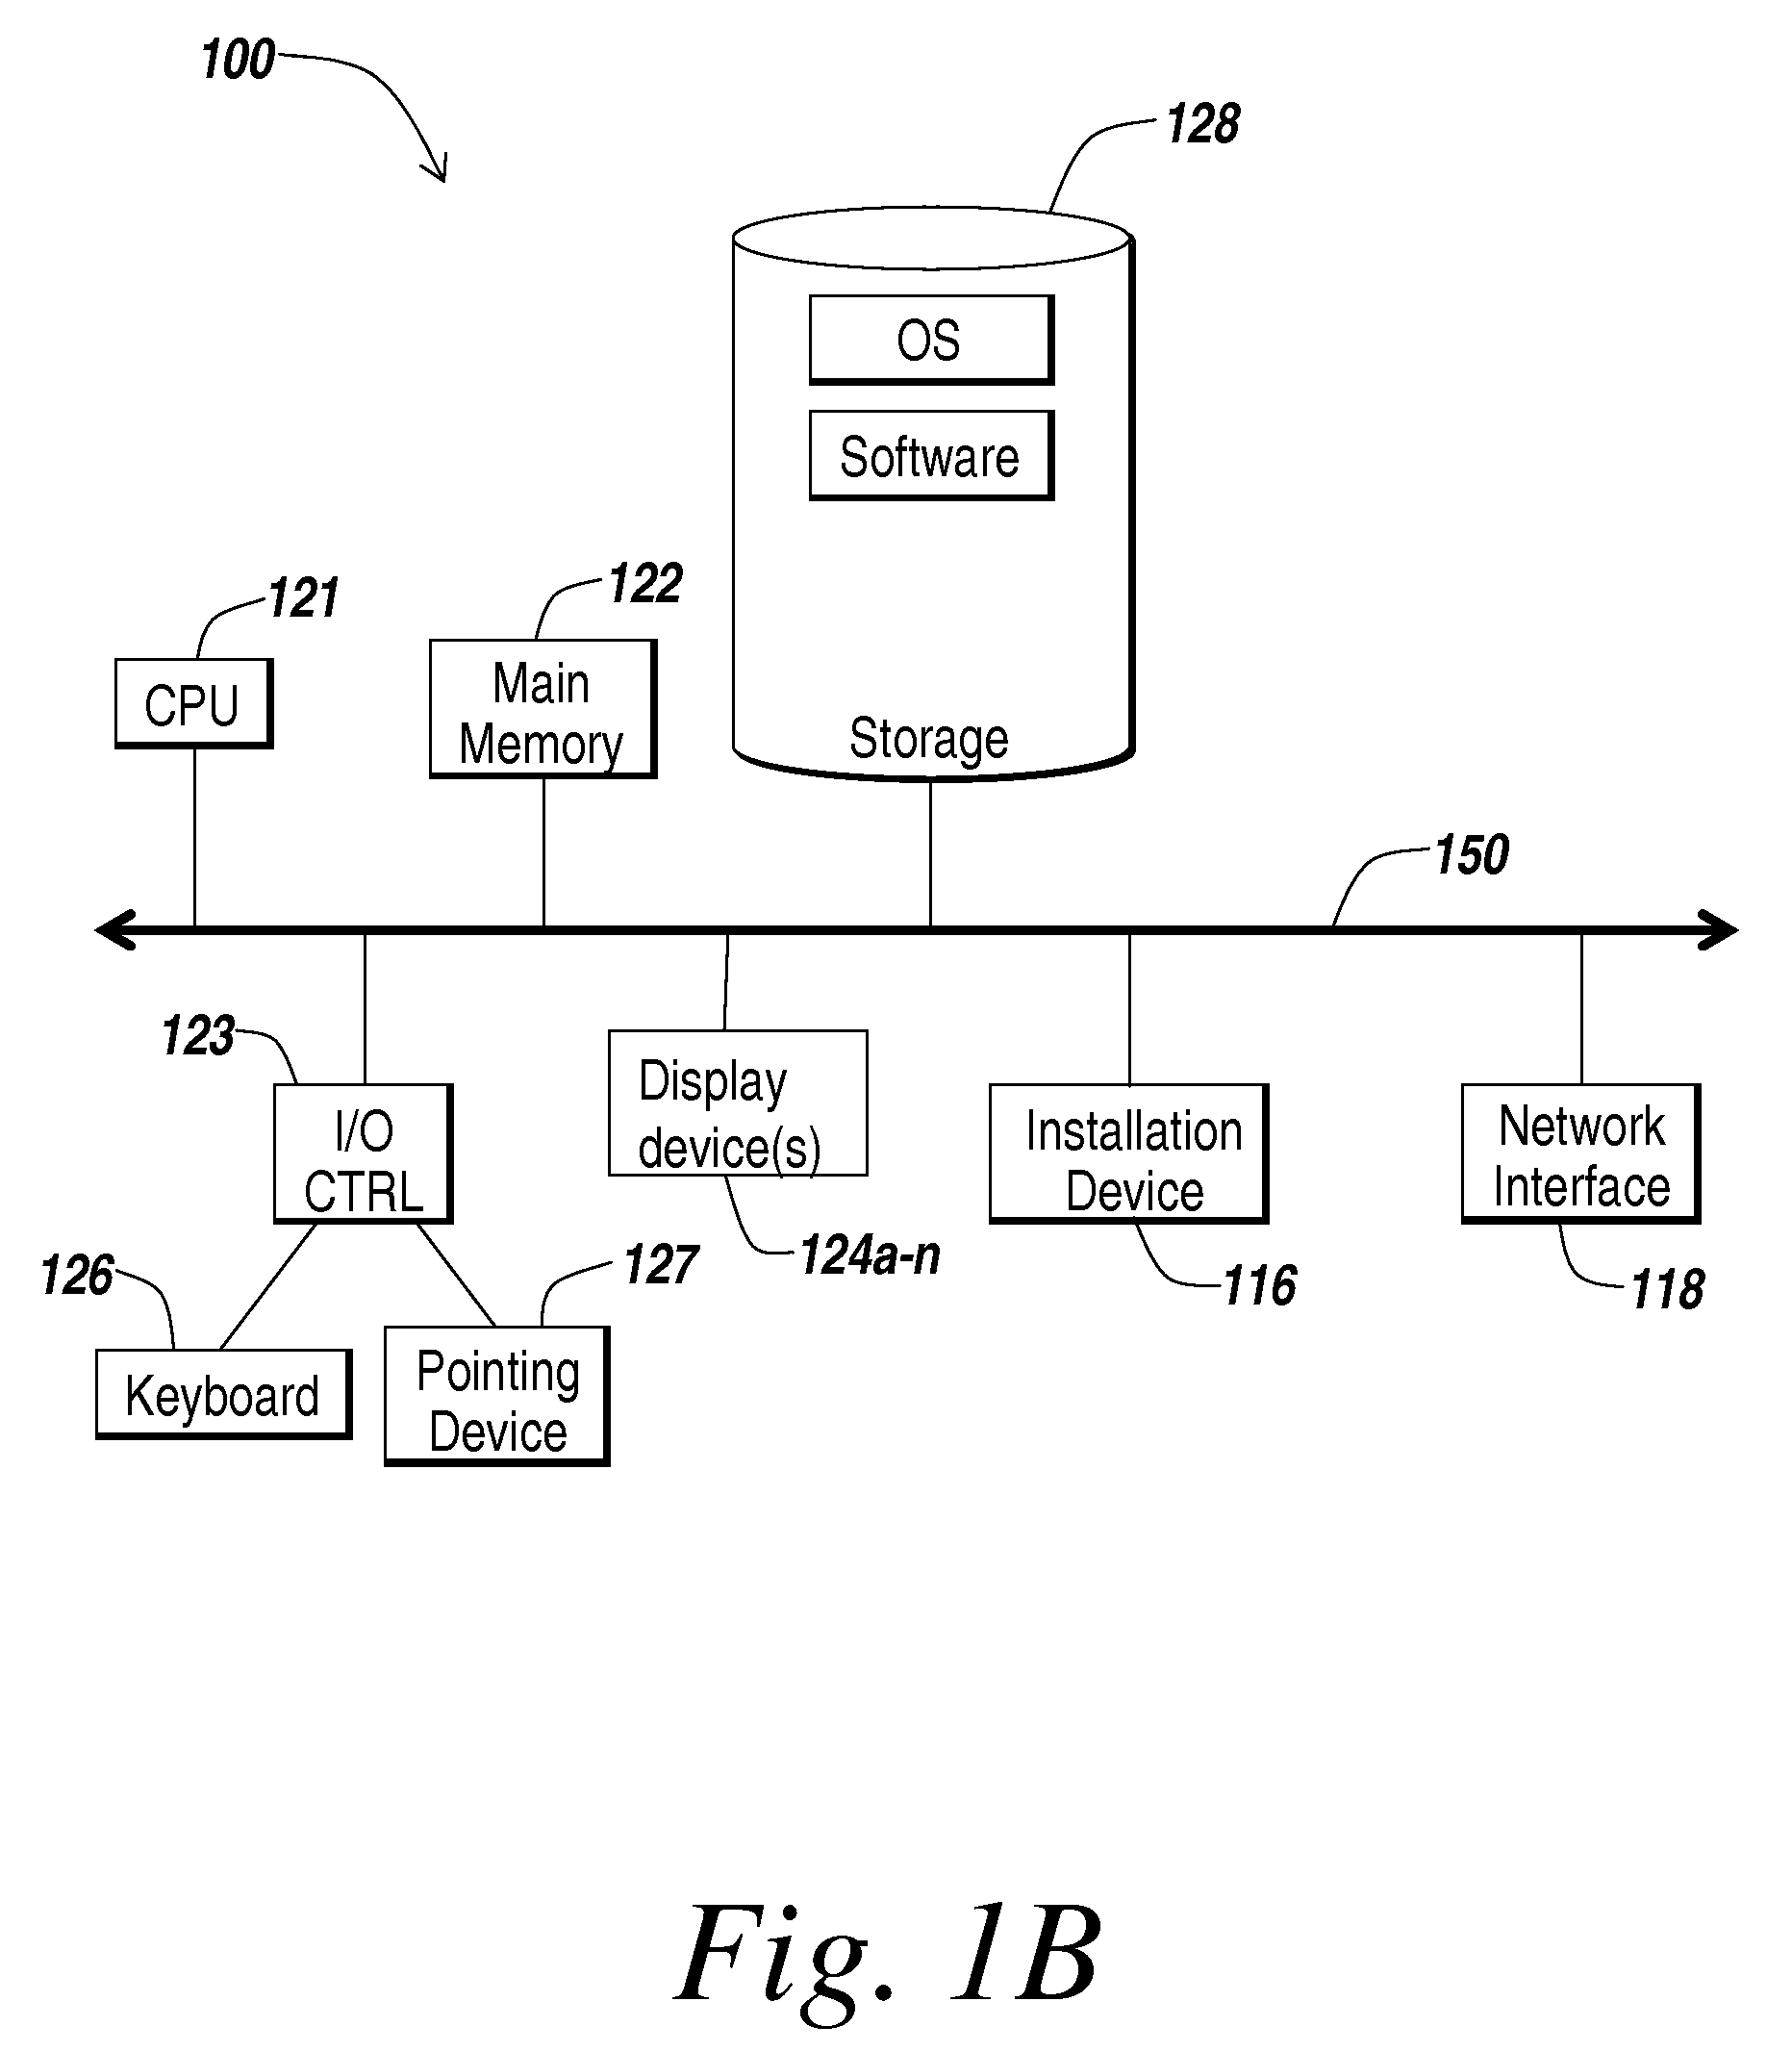 Methods and Systems for Dynamically Switching Between Communications Protocols